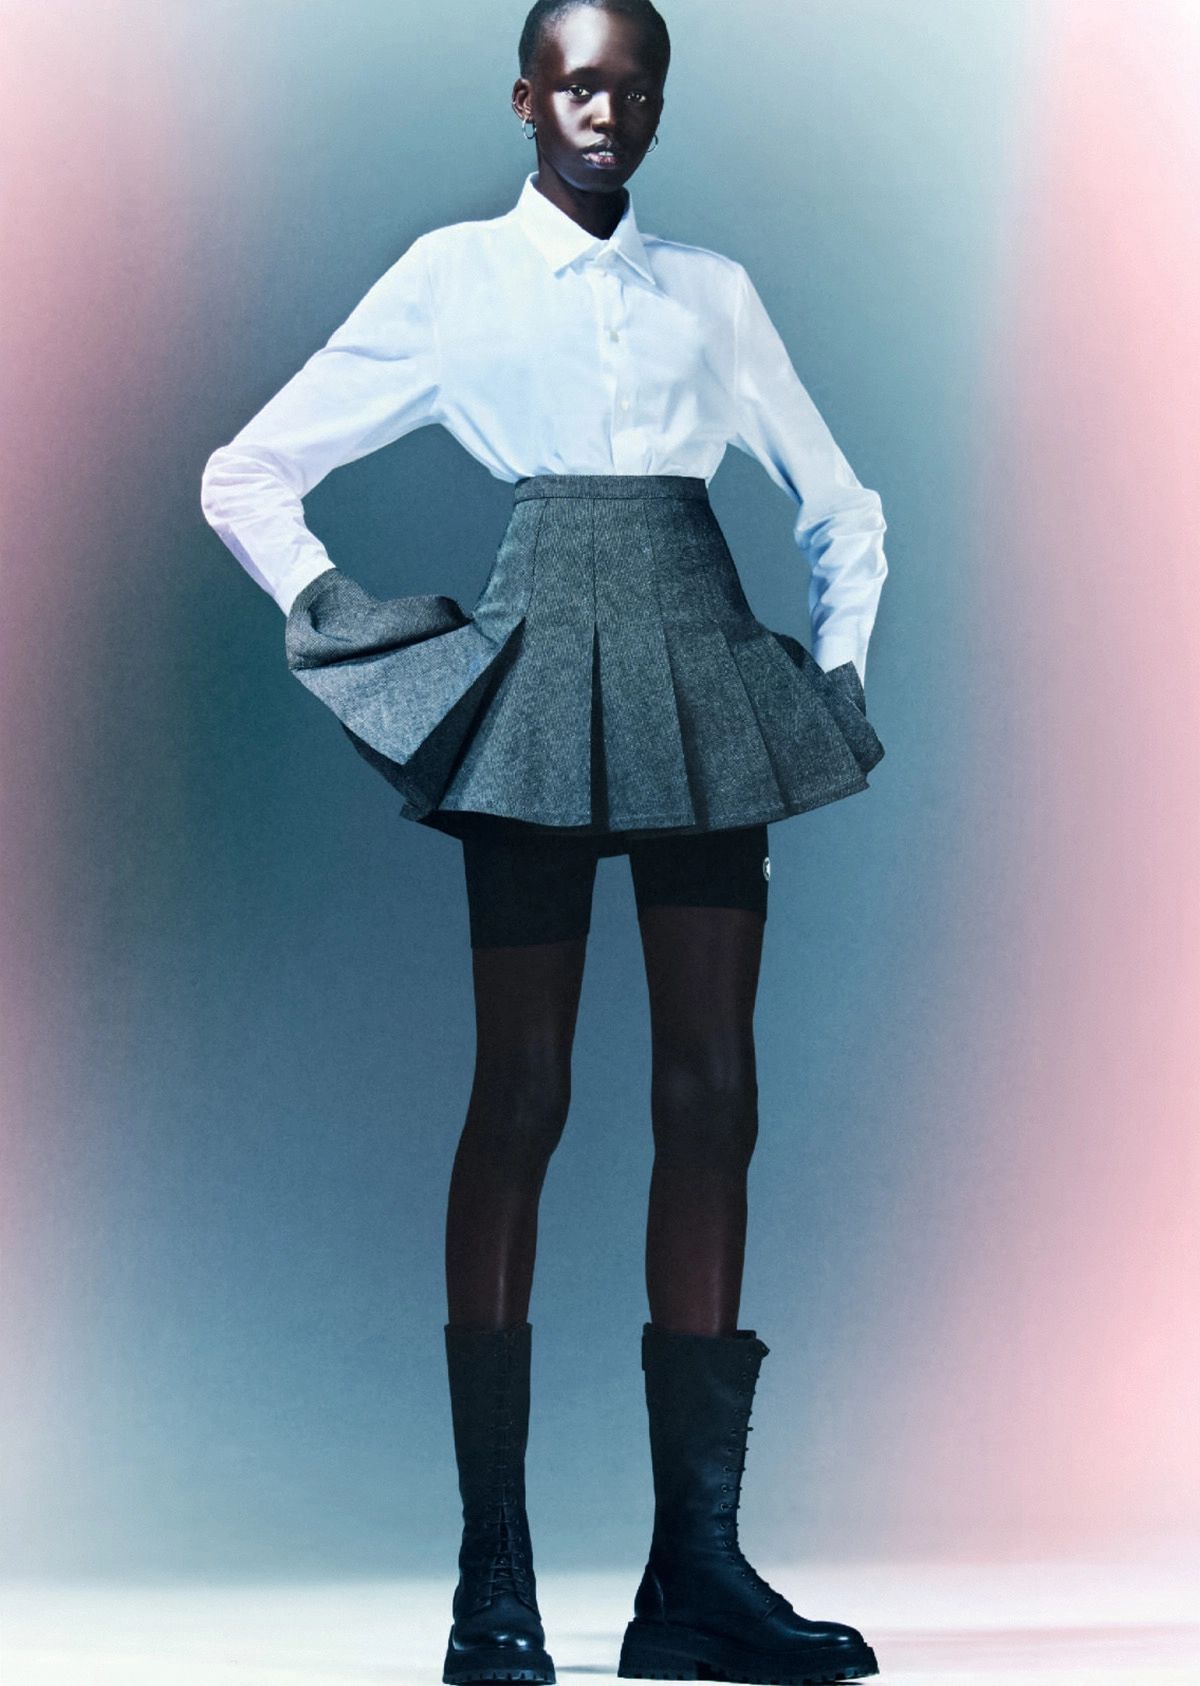 Clothing & Accessories: Cotton Shirt, Wool Skort and Technical Mesh Shorts, all by Dior / Black Carro Boots by Marsell / Gold and Diamond Earrings by Maria Tash / Silver Hoop Earrings by Slim Barrett